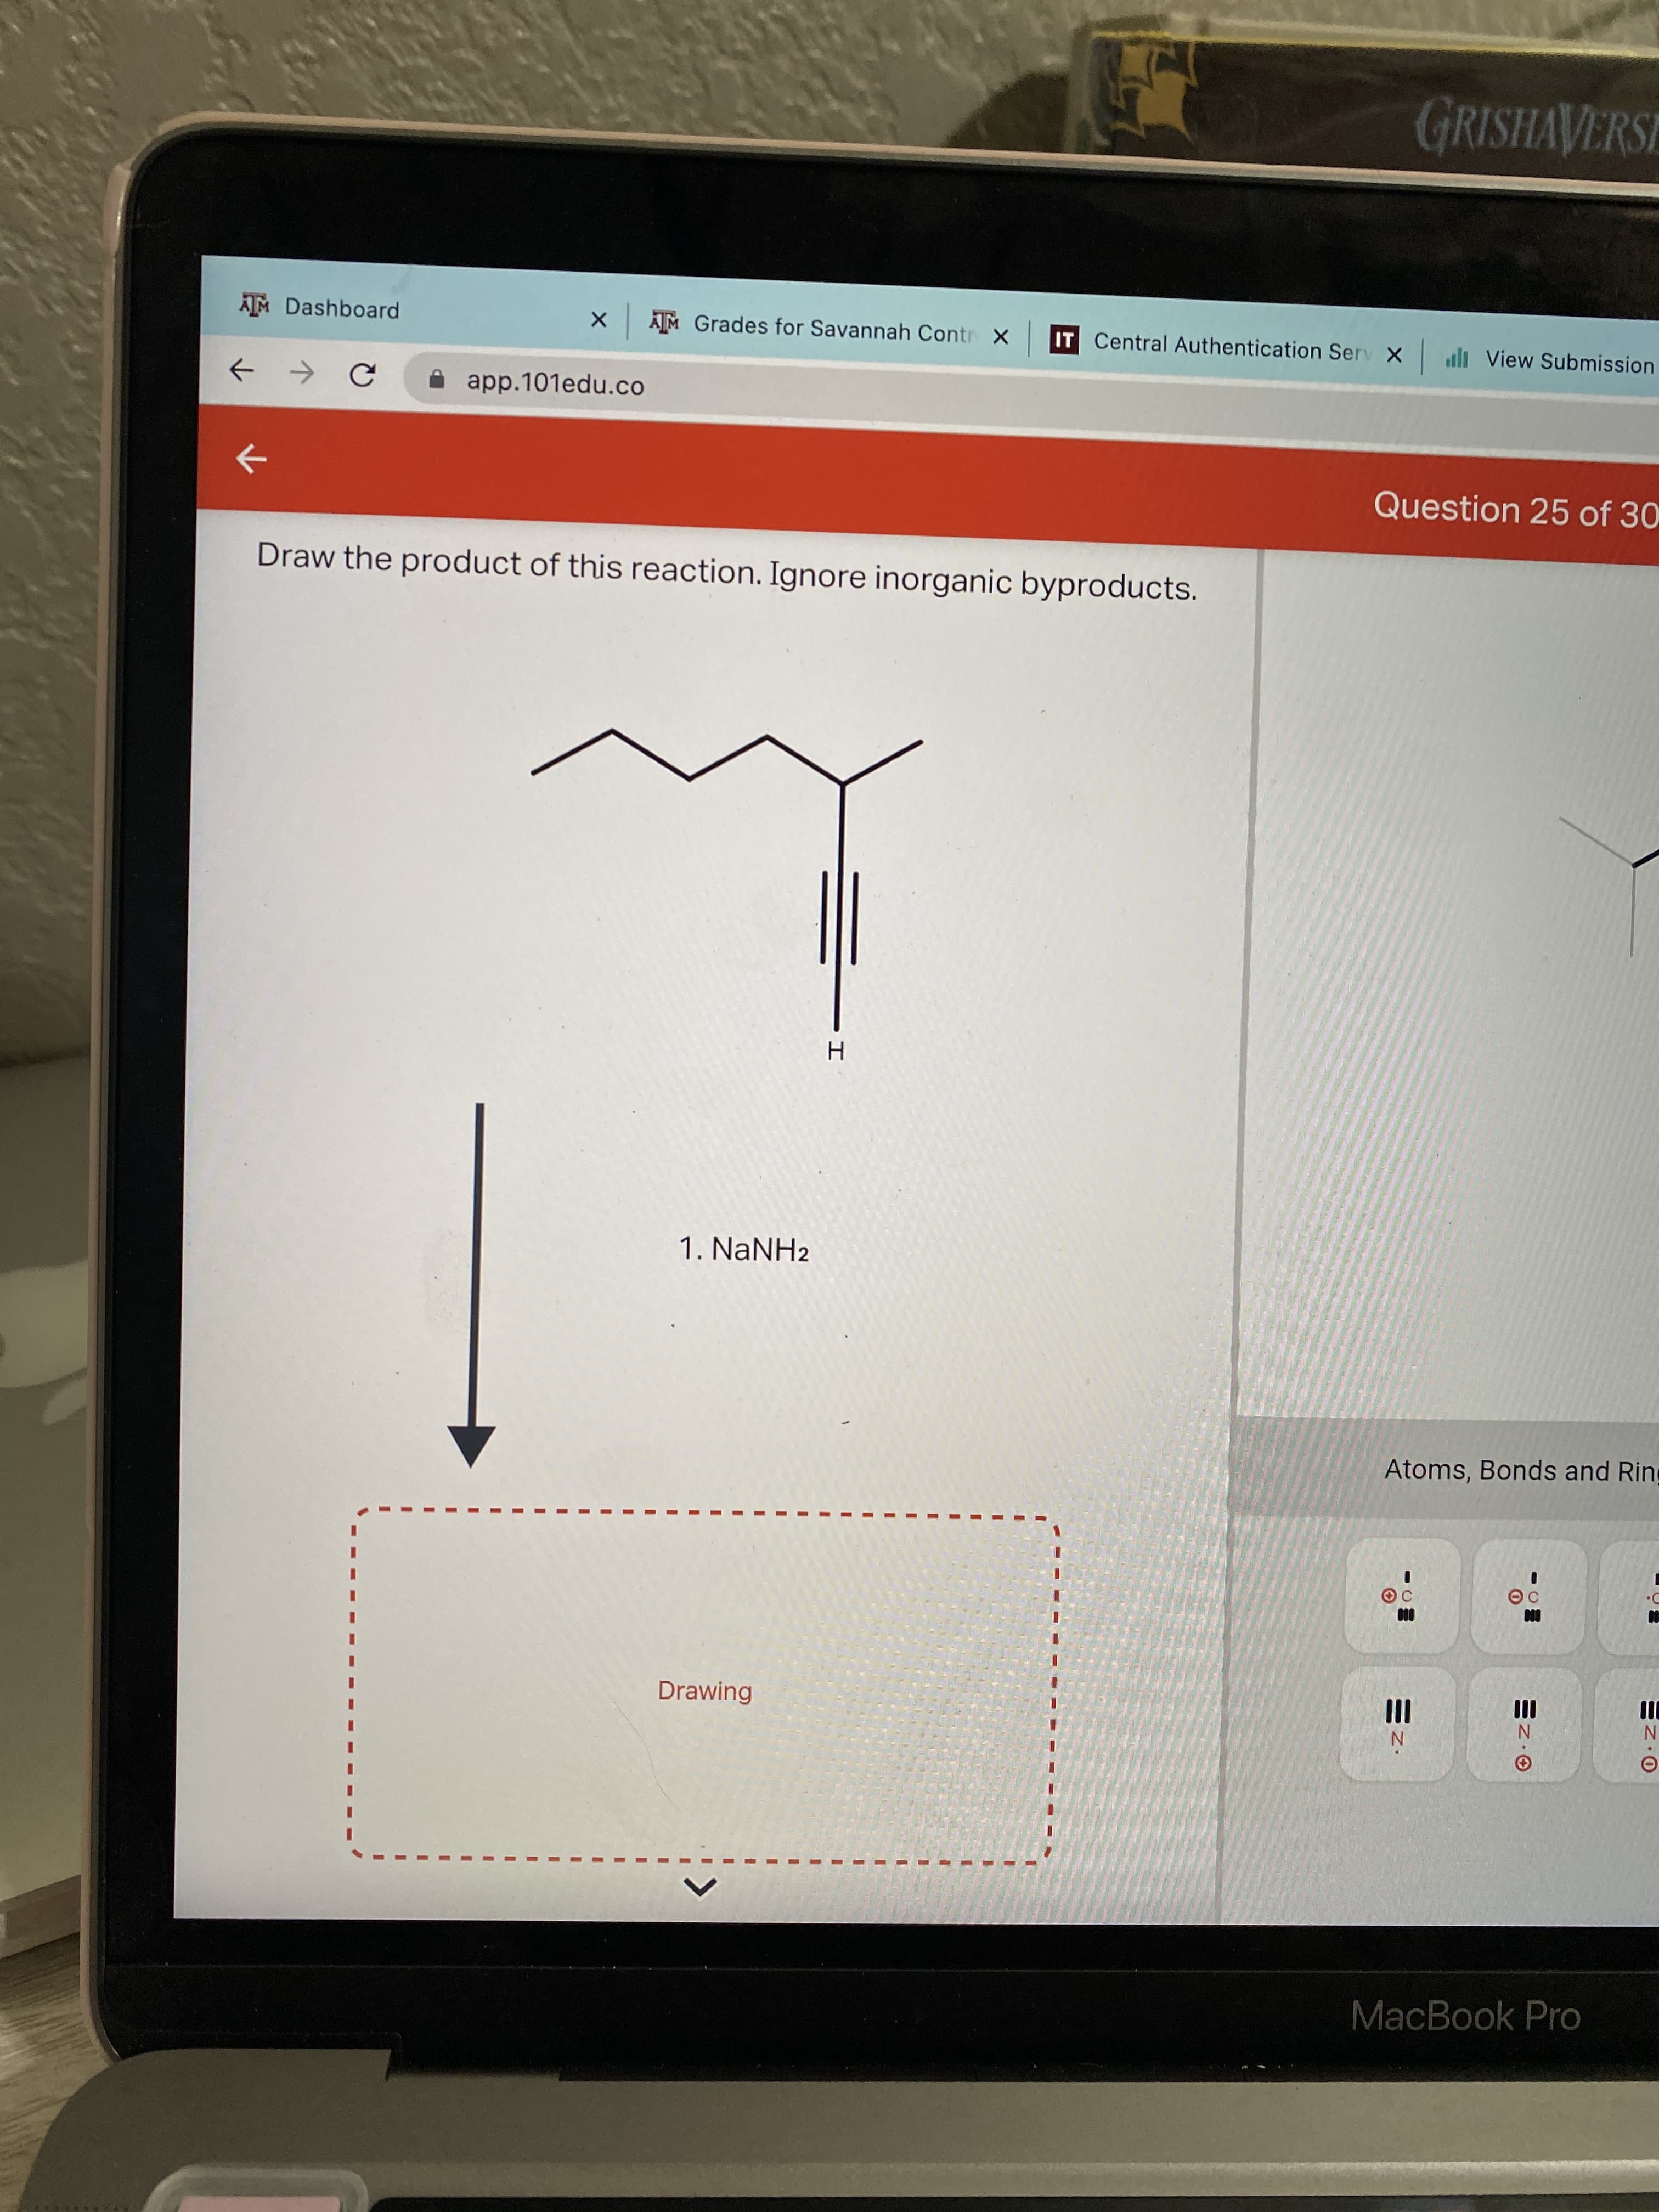 1.
3D
3D
3D
GRISHAVERSE
AM Dashboard
X AM Grades for Savannah Contr X
IT Central Authentication Serv X l View Submission
A app.101edu.co
Question 25 of 30
->
Draw the product of this reaction. Ignore inorganic byproducts.
1. NANH2
Atoms, Bonds and Rine
Drawing
II
II
N
MacBook Pro
